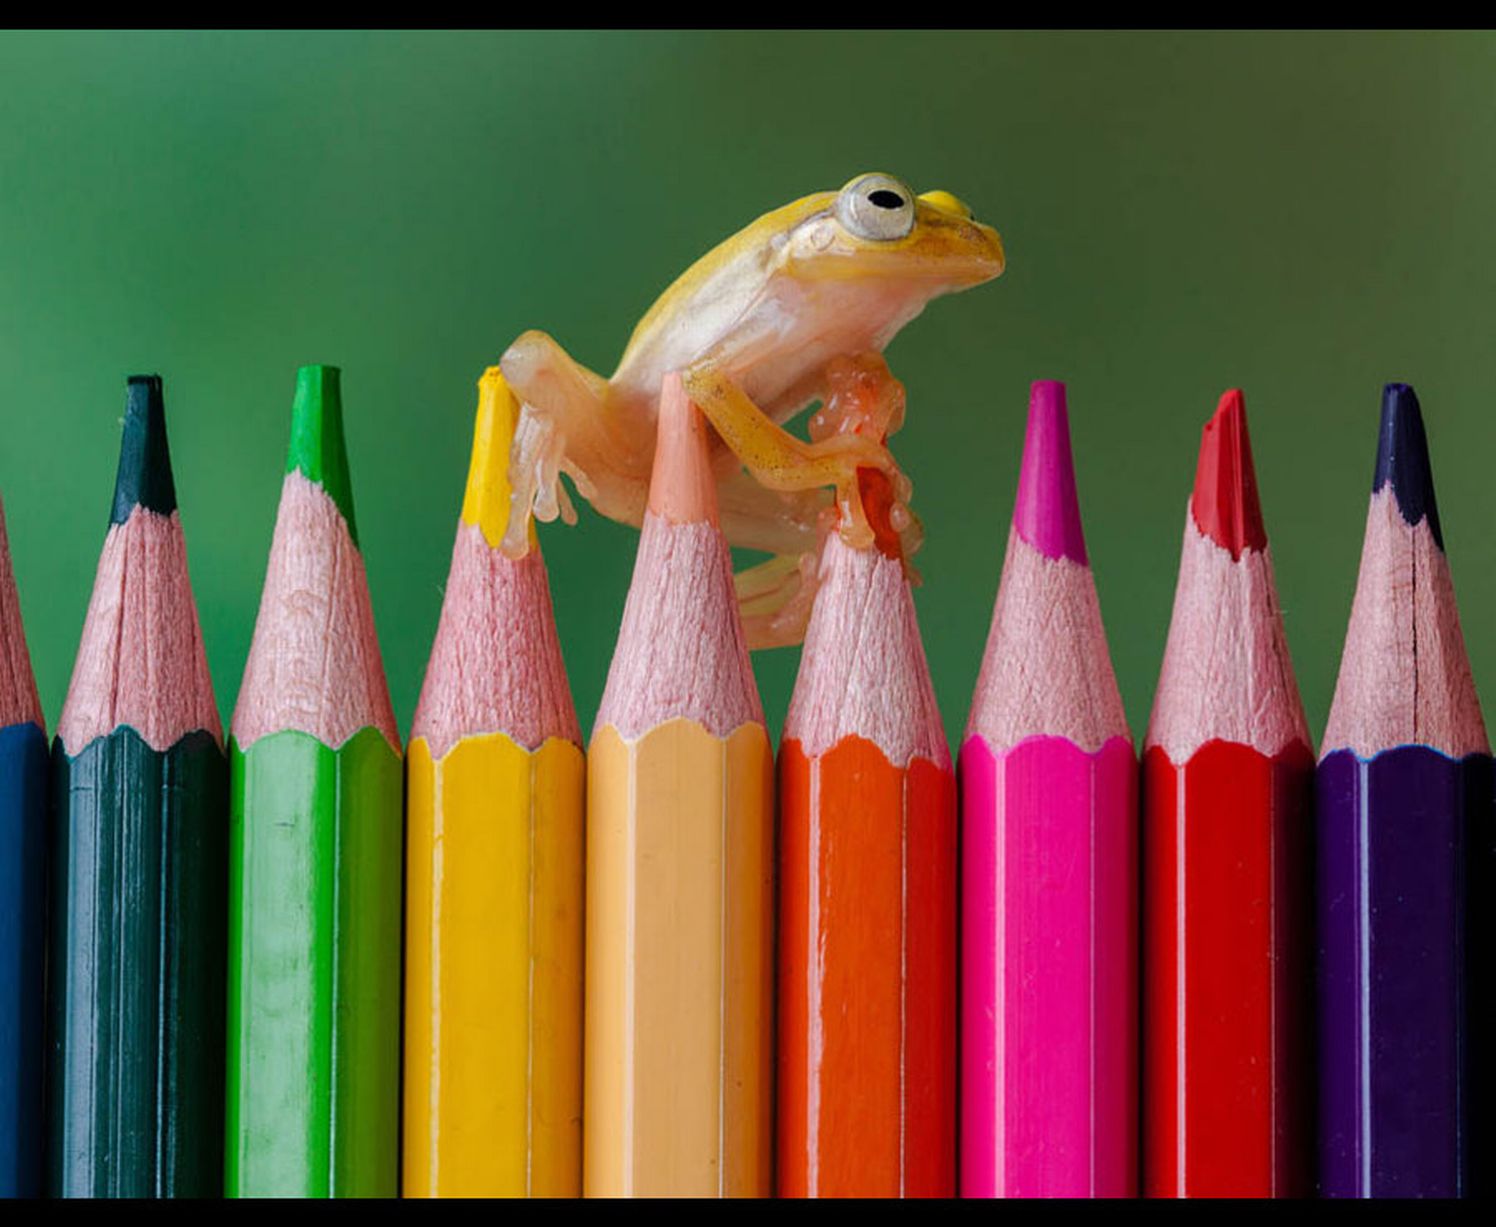 A tiny frog rests on top of crayons, as you do